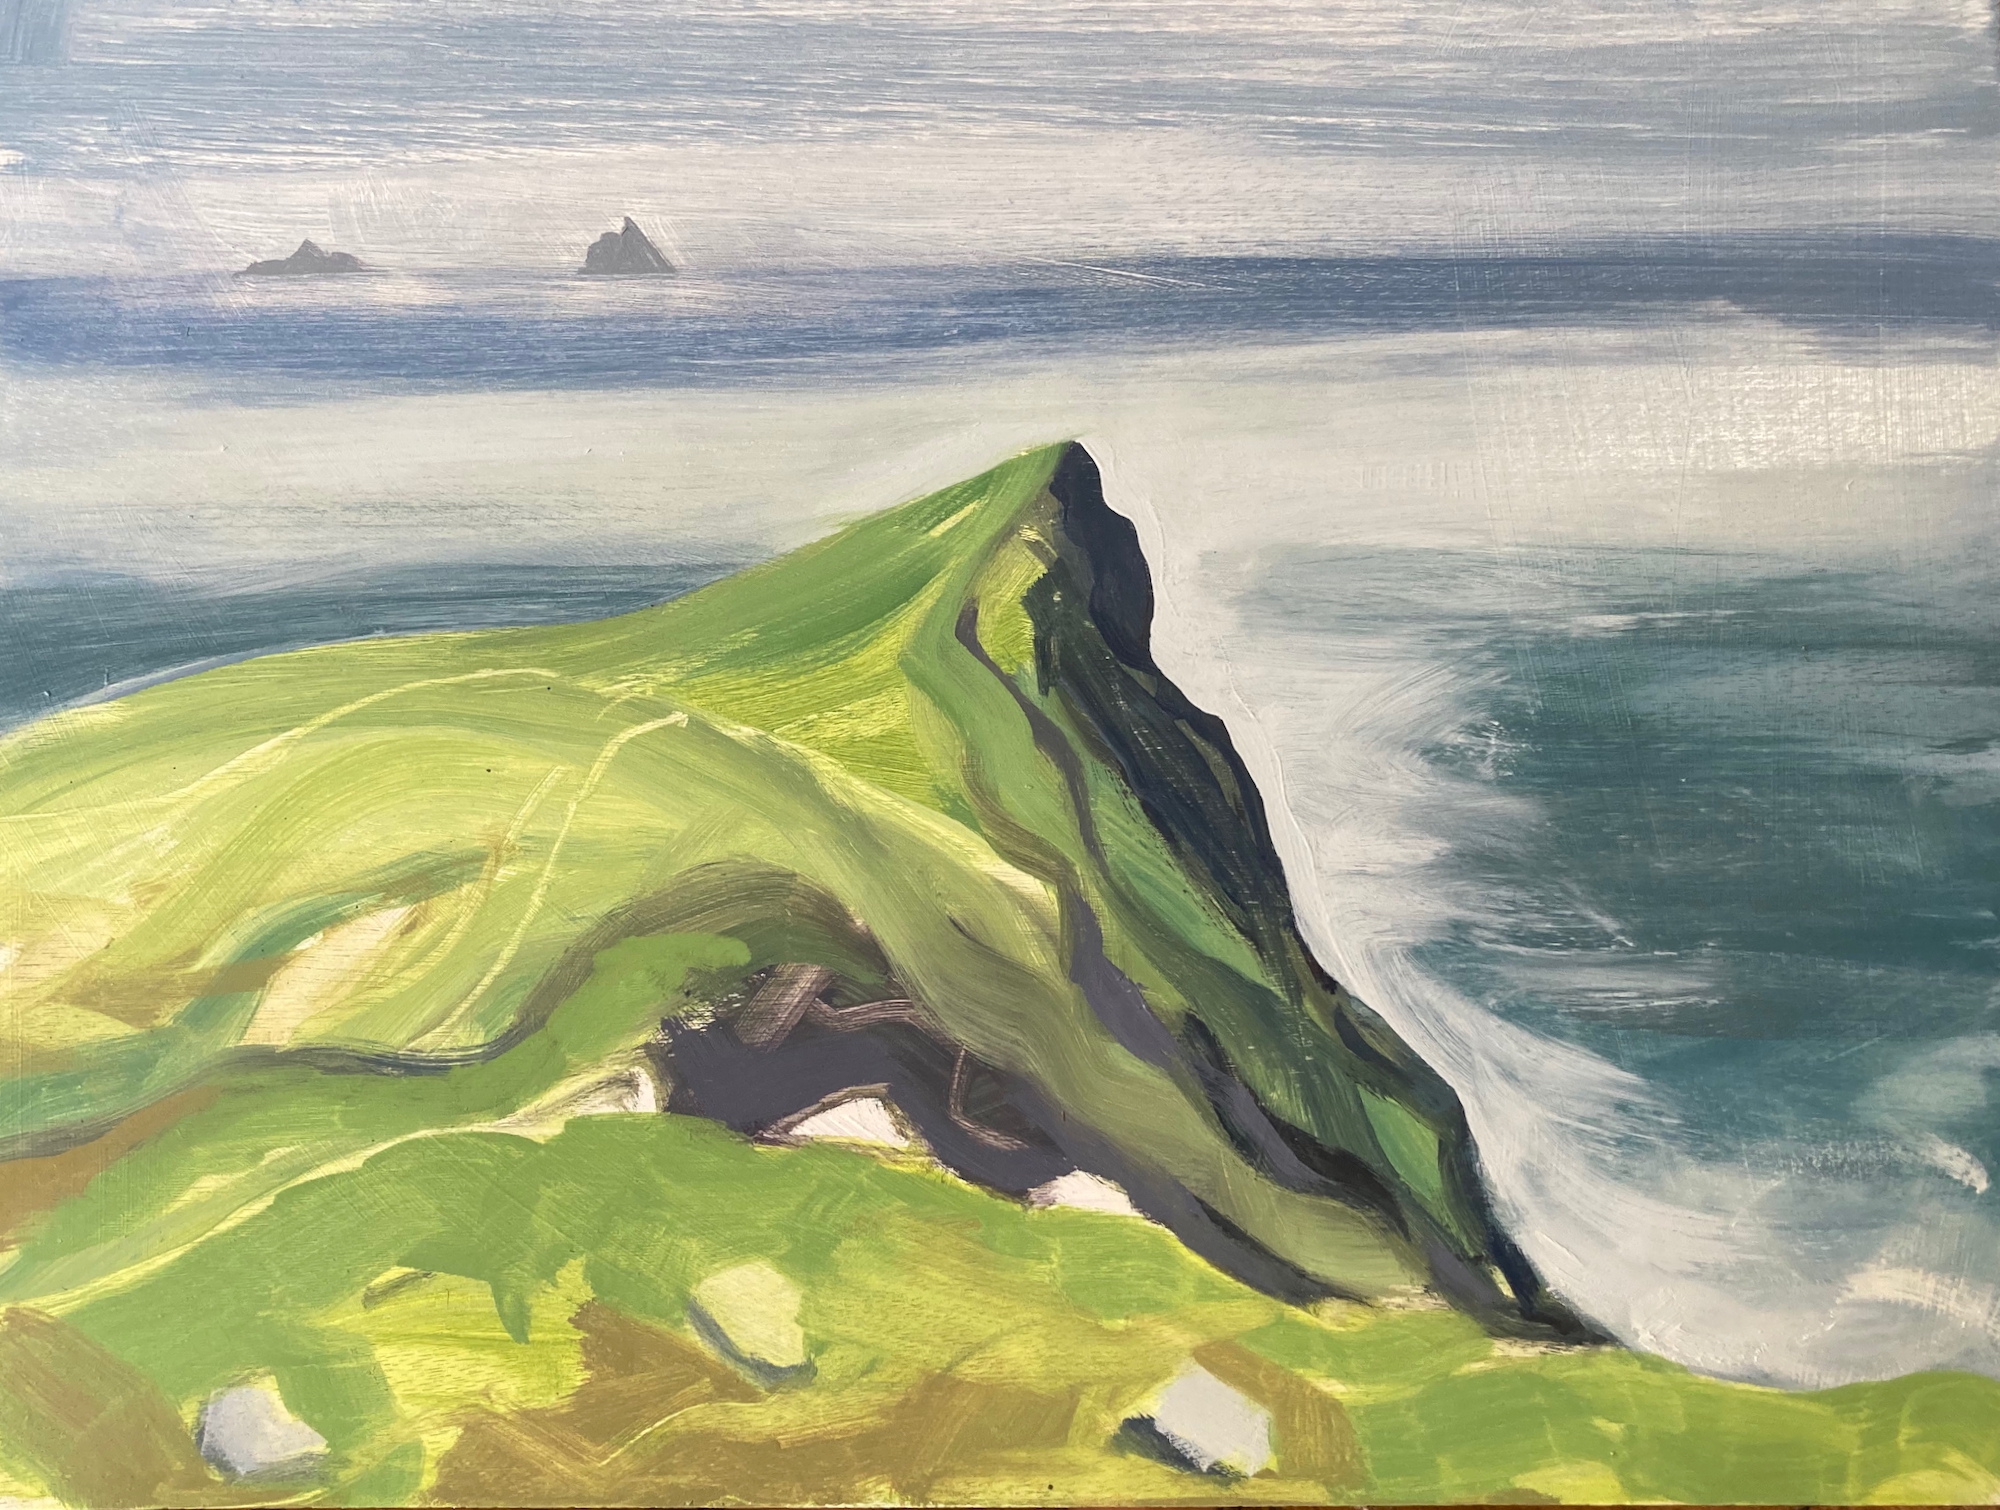 County Kerry: Bray Head and the Skelligs